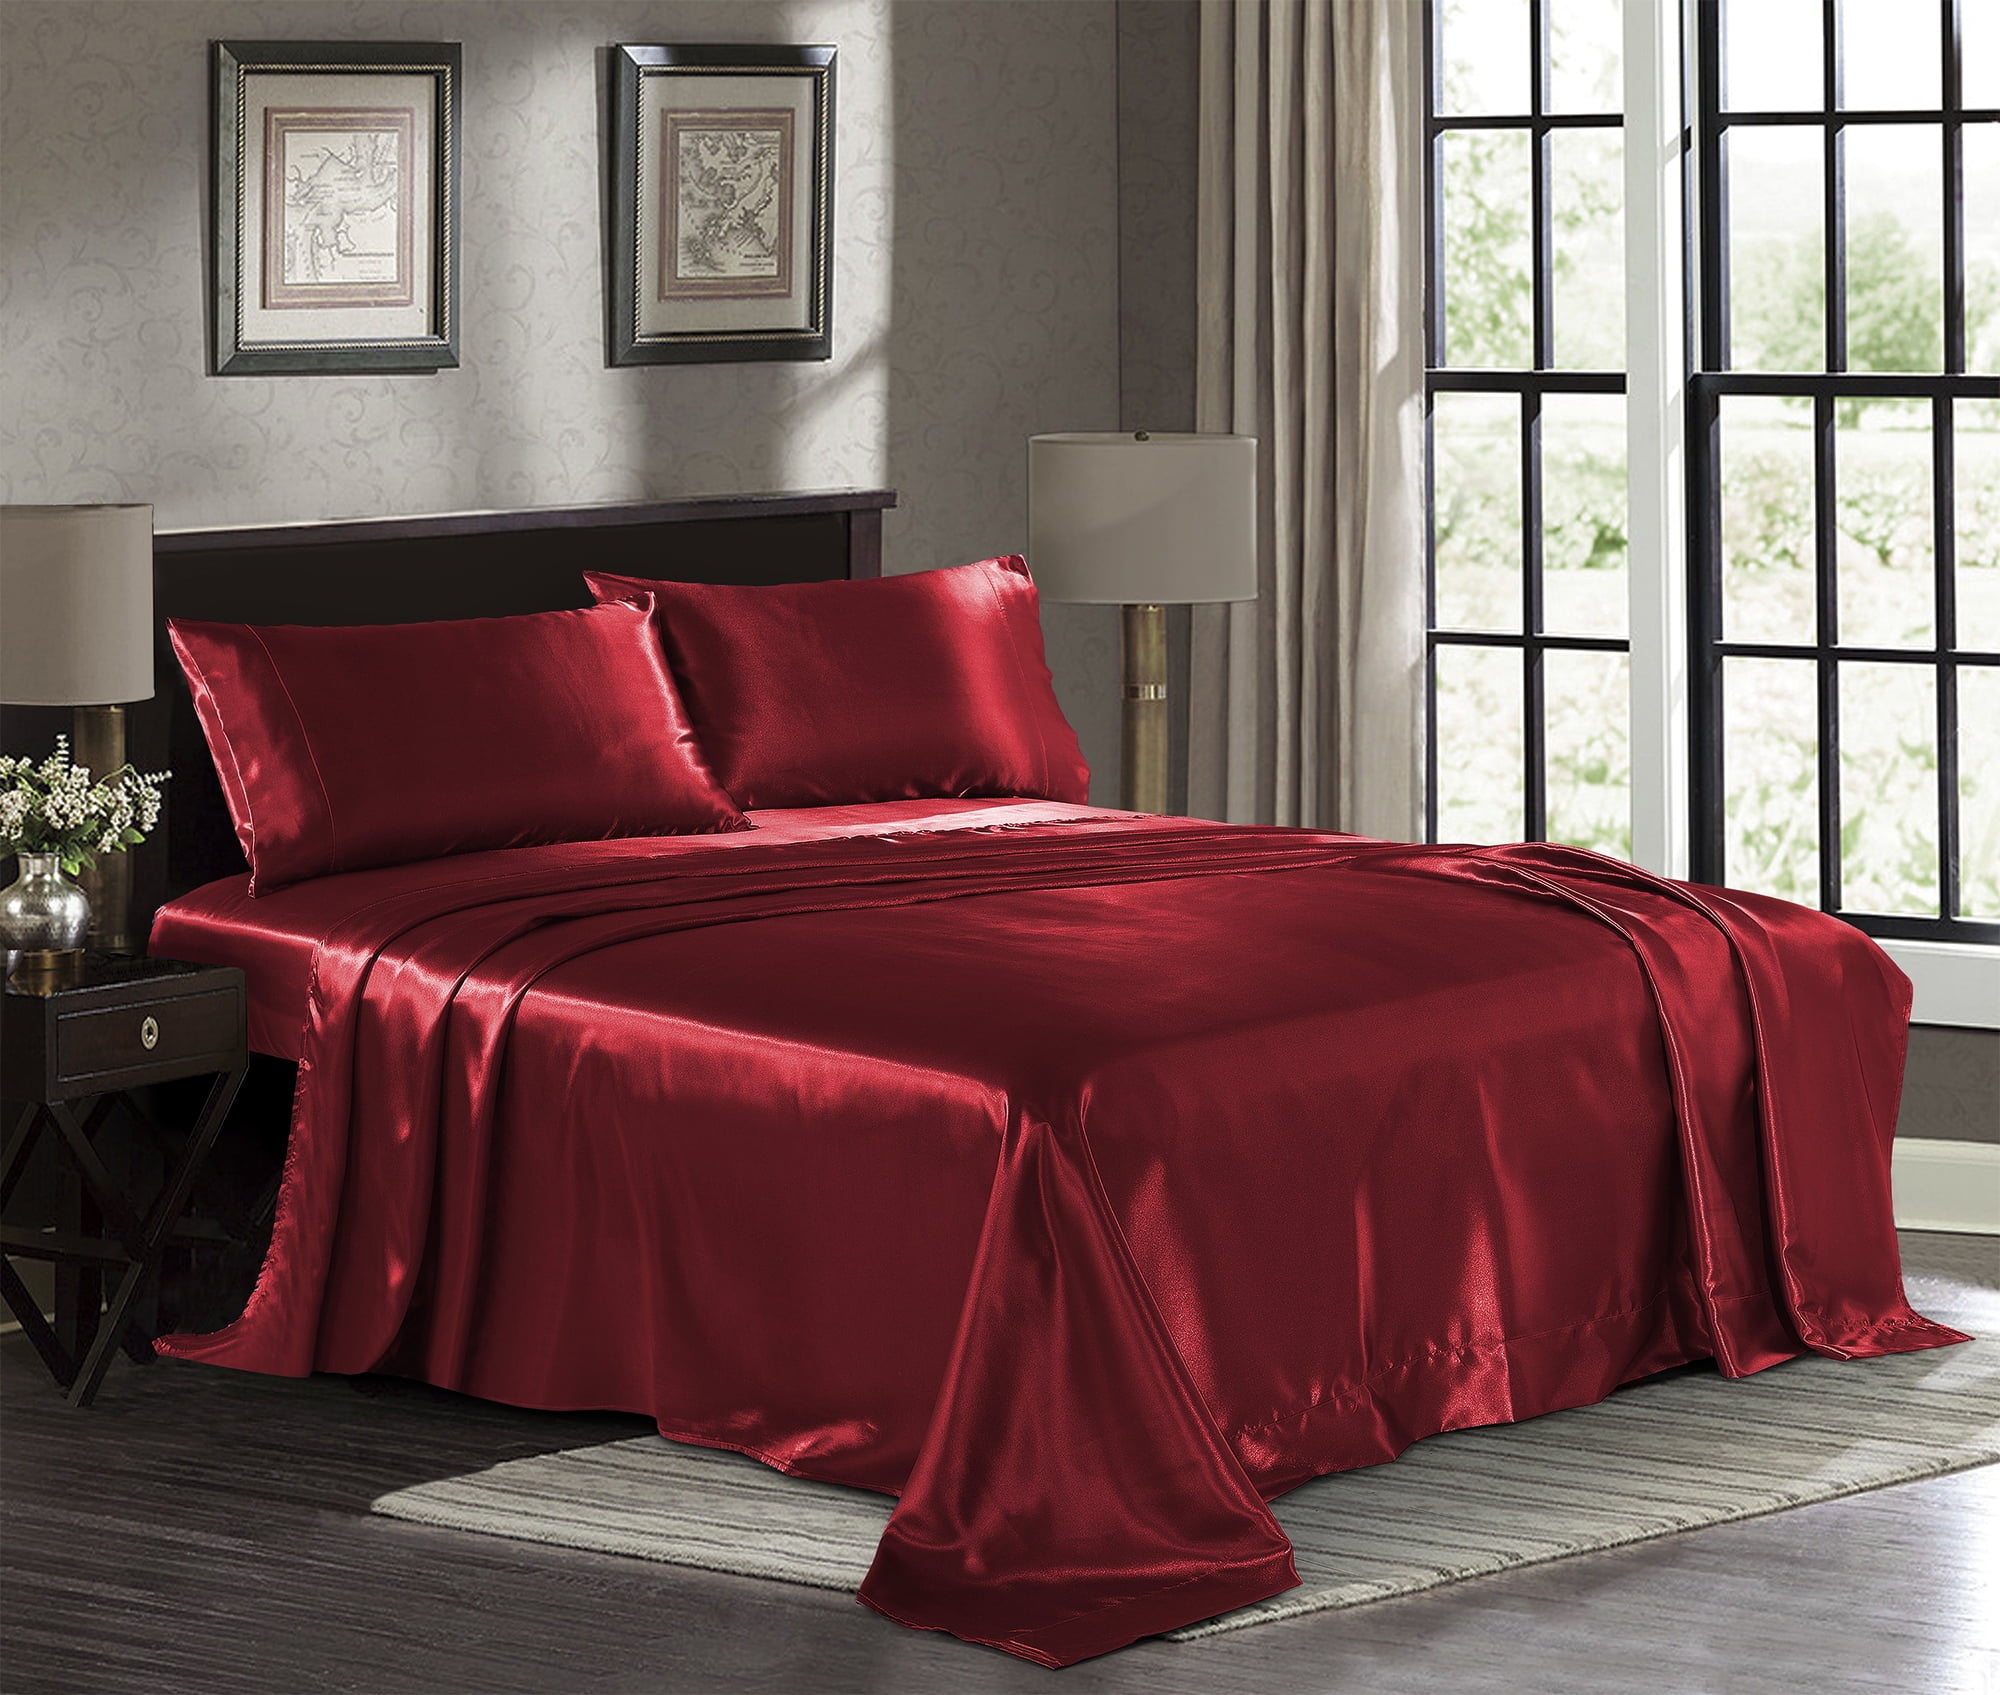 Details about   4Pcs Satin Bed Sheet Set Deep Pocket Sheets Queen King Full Size Fitted Sheet 